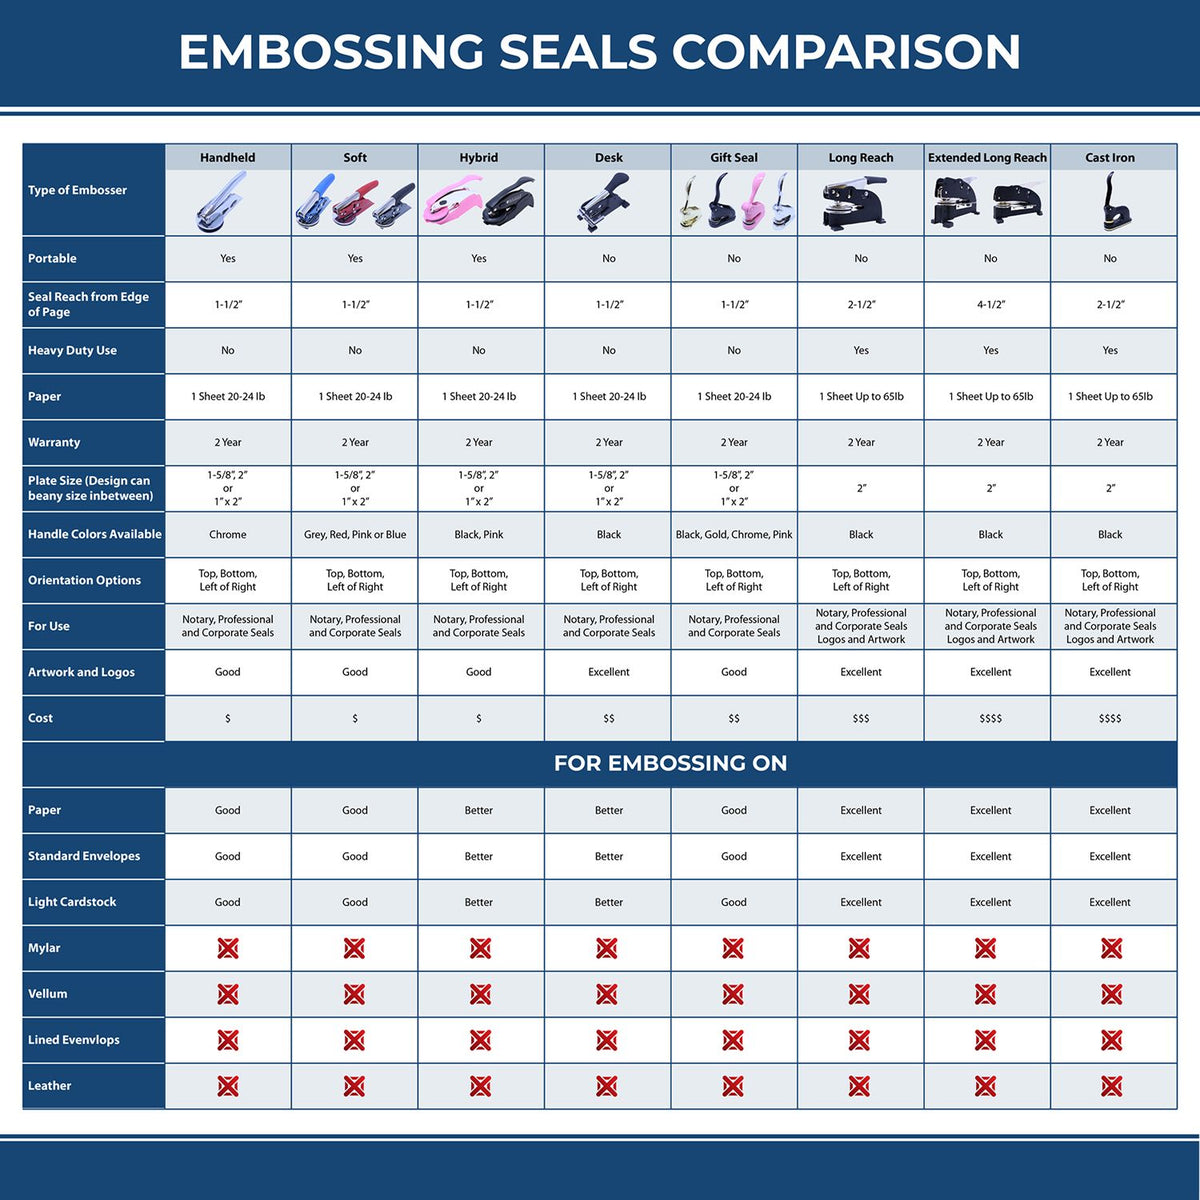 A comparison chart for the different types of mount models available for the Long Reach Michigan Geology Seal